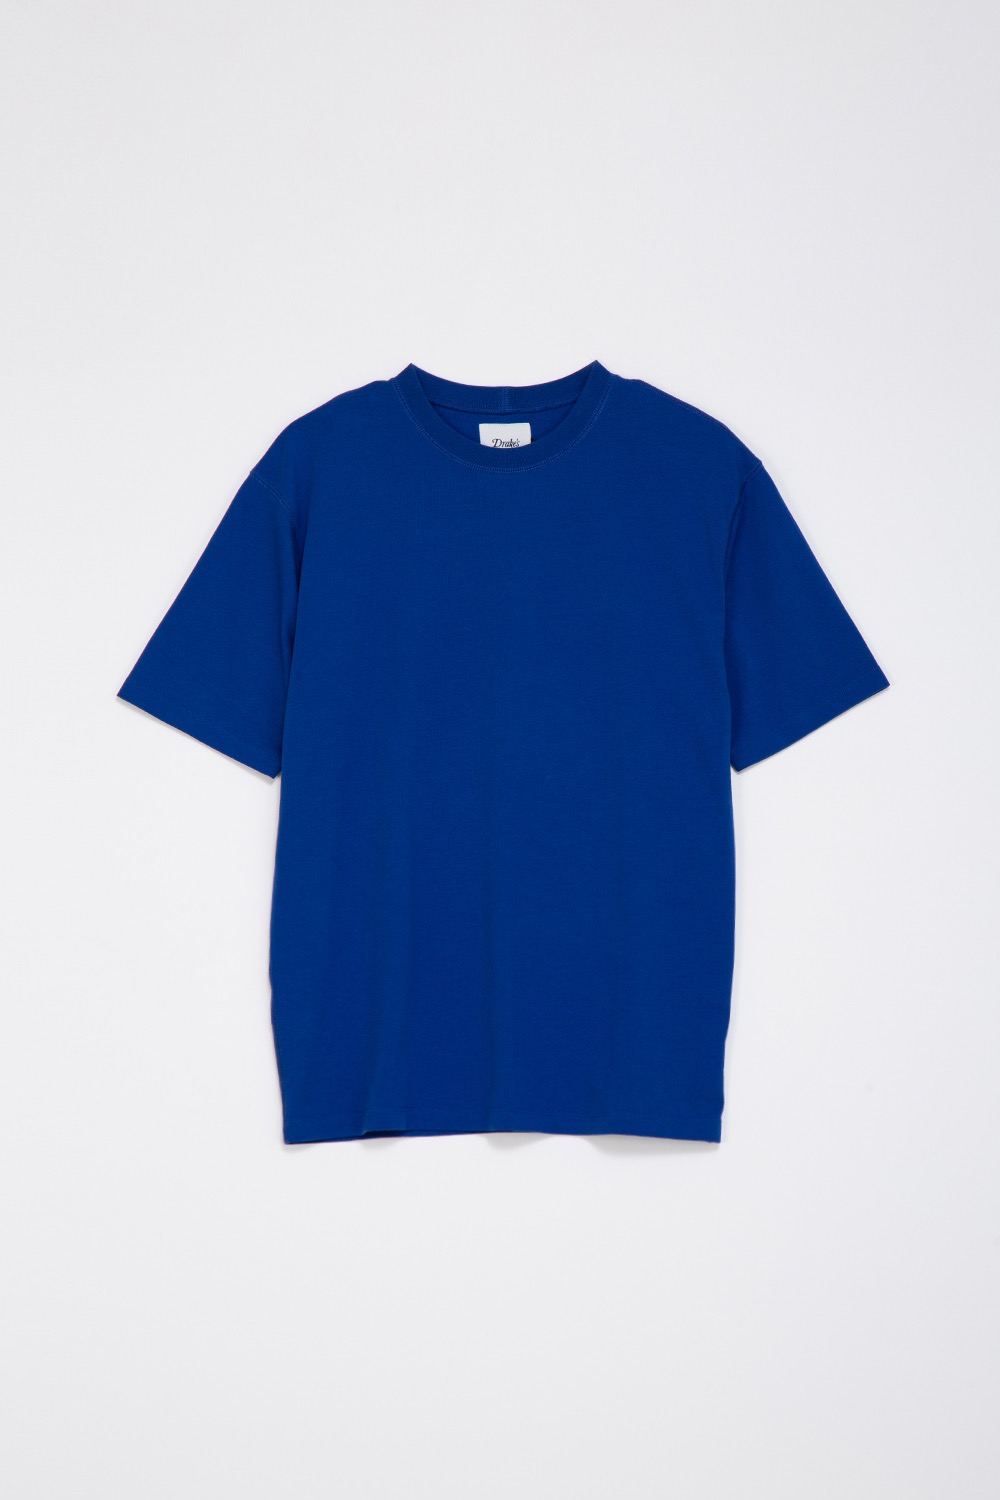 (CARRY OVER) COTTON CREW NECK HIKING T-SHIRT BRIGHT BLUE